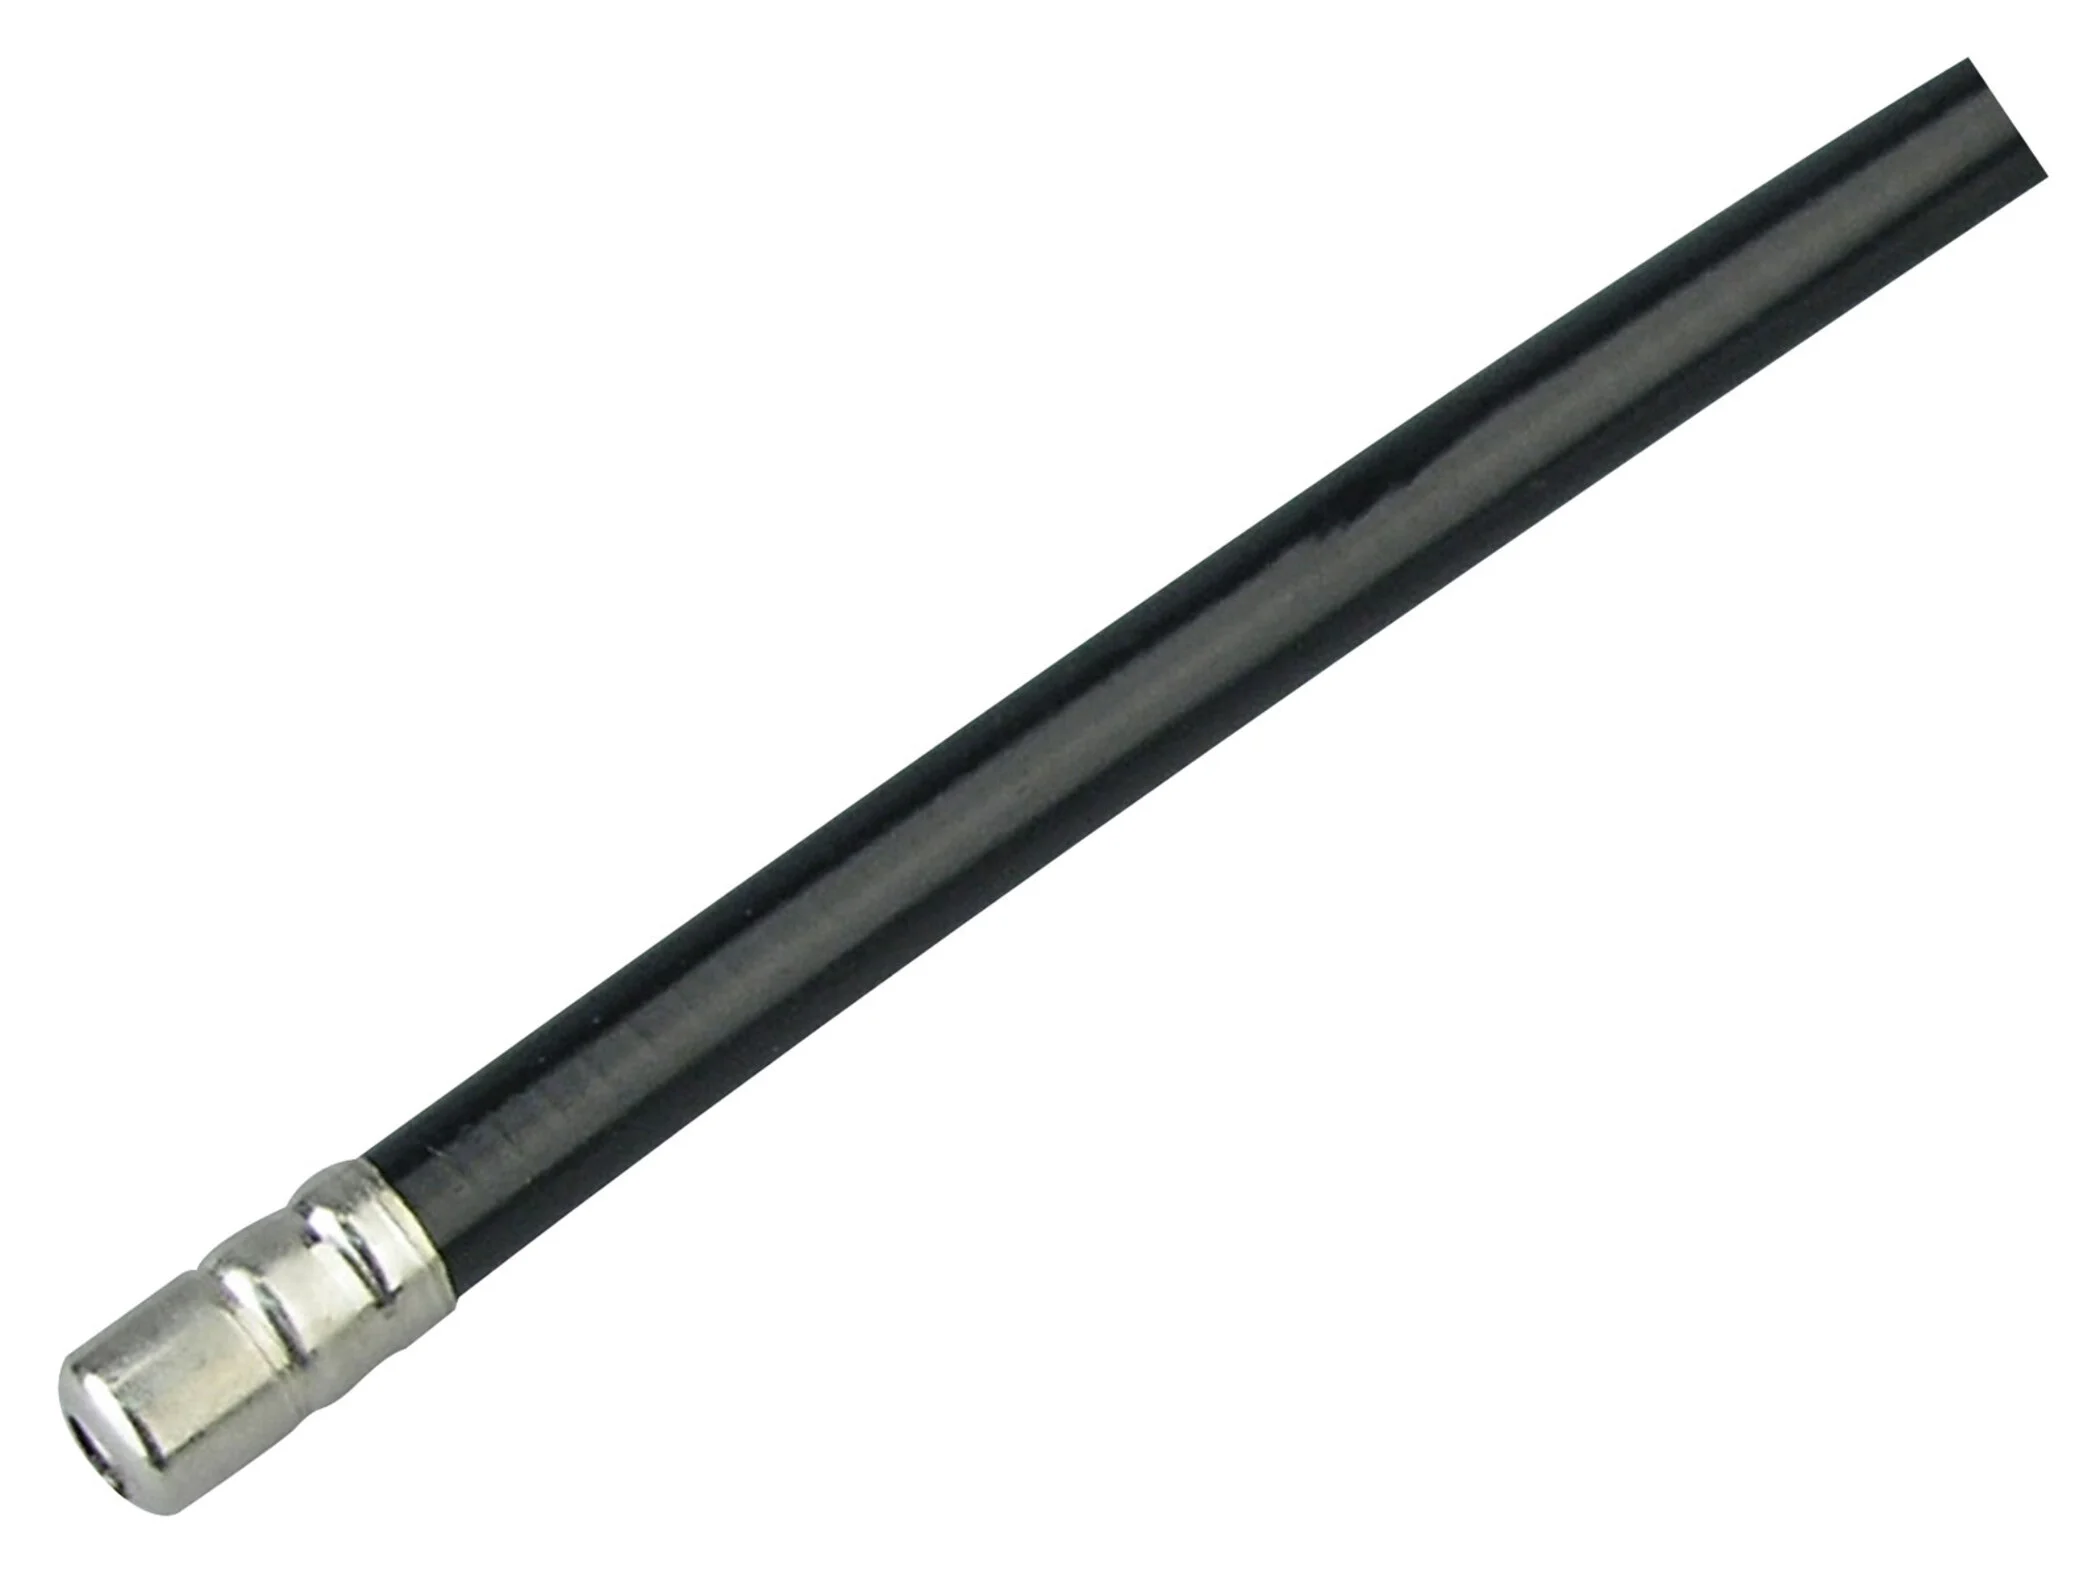 CABLE HOUSING, BLACK